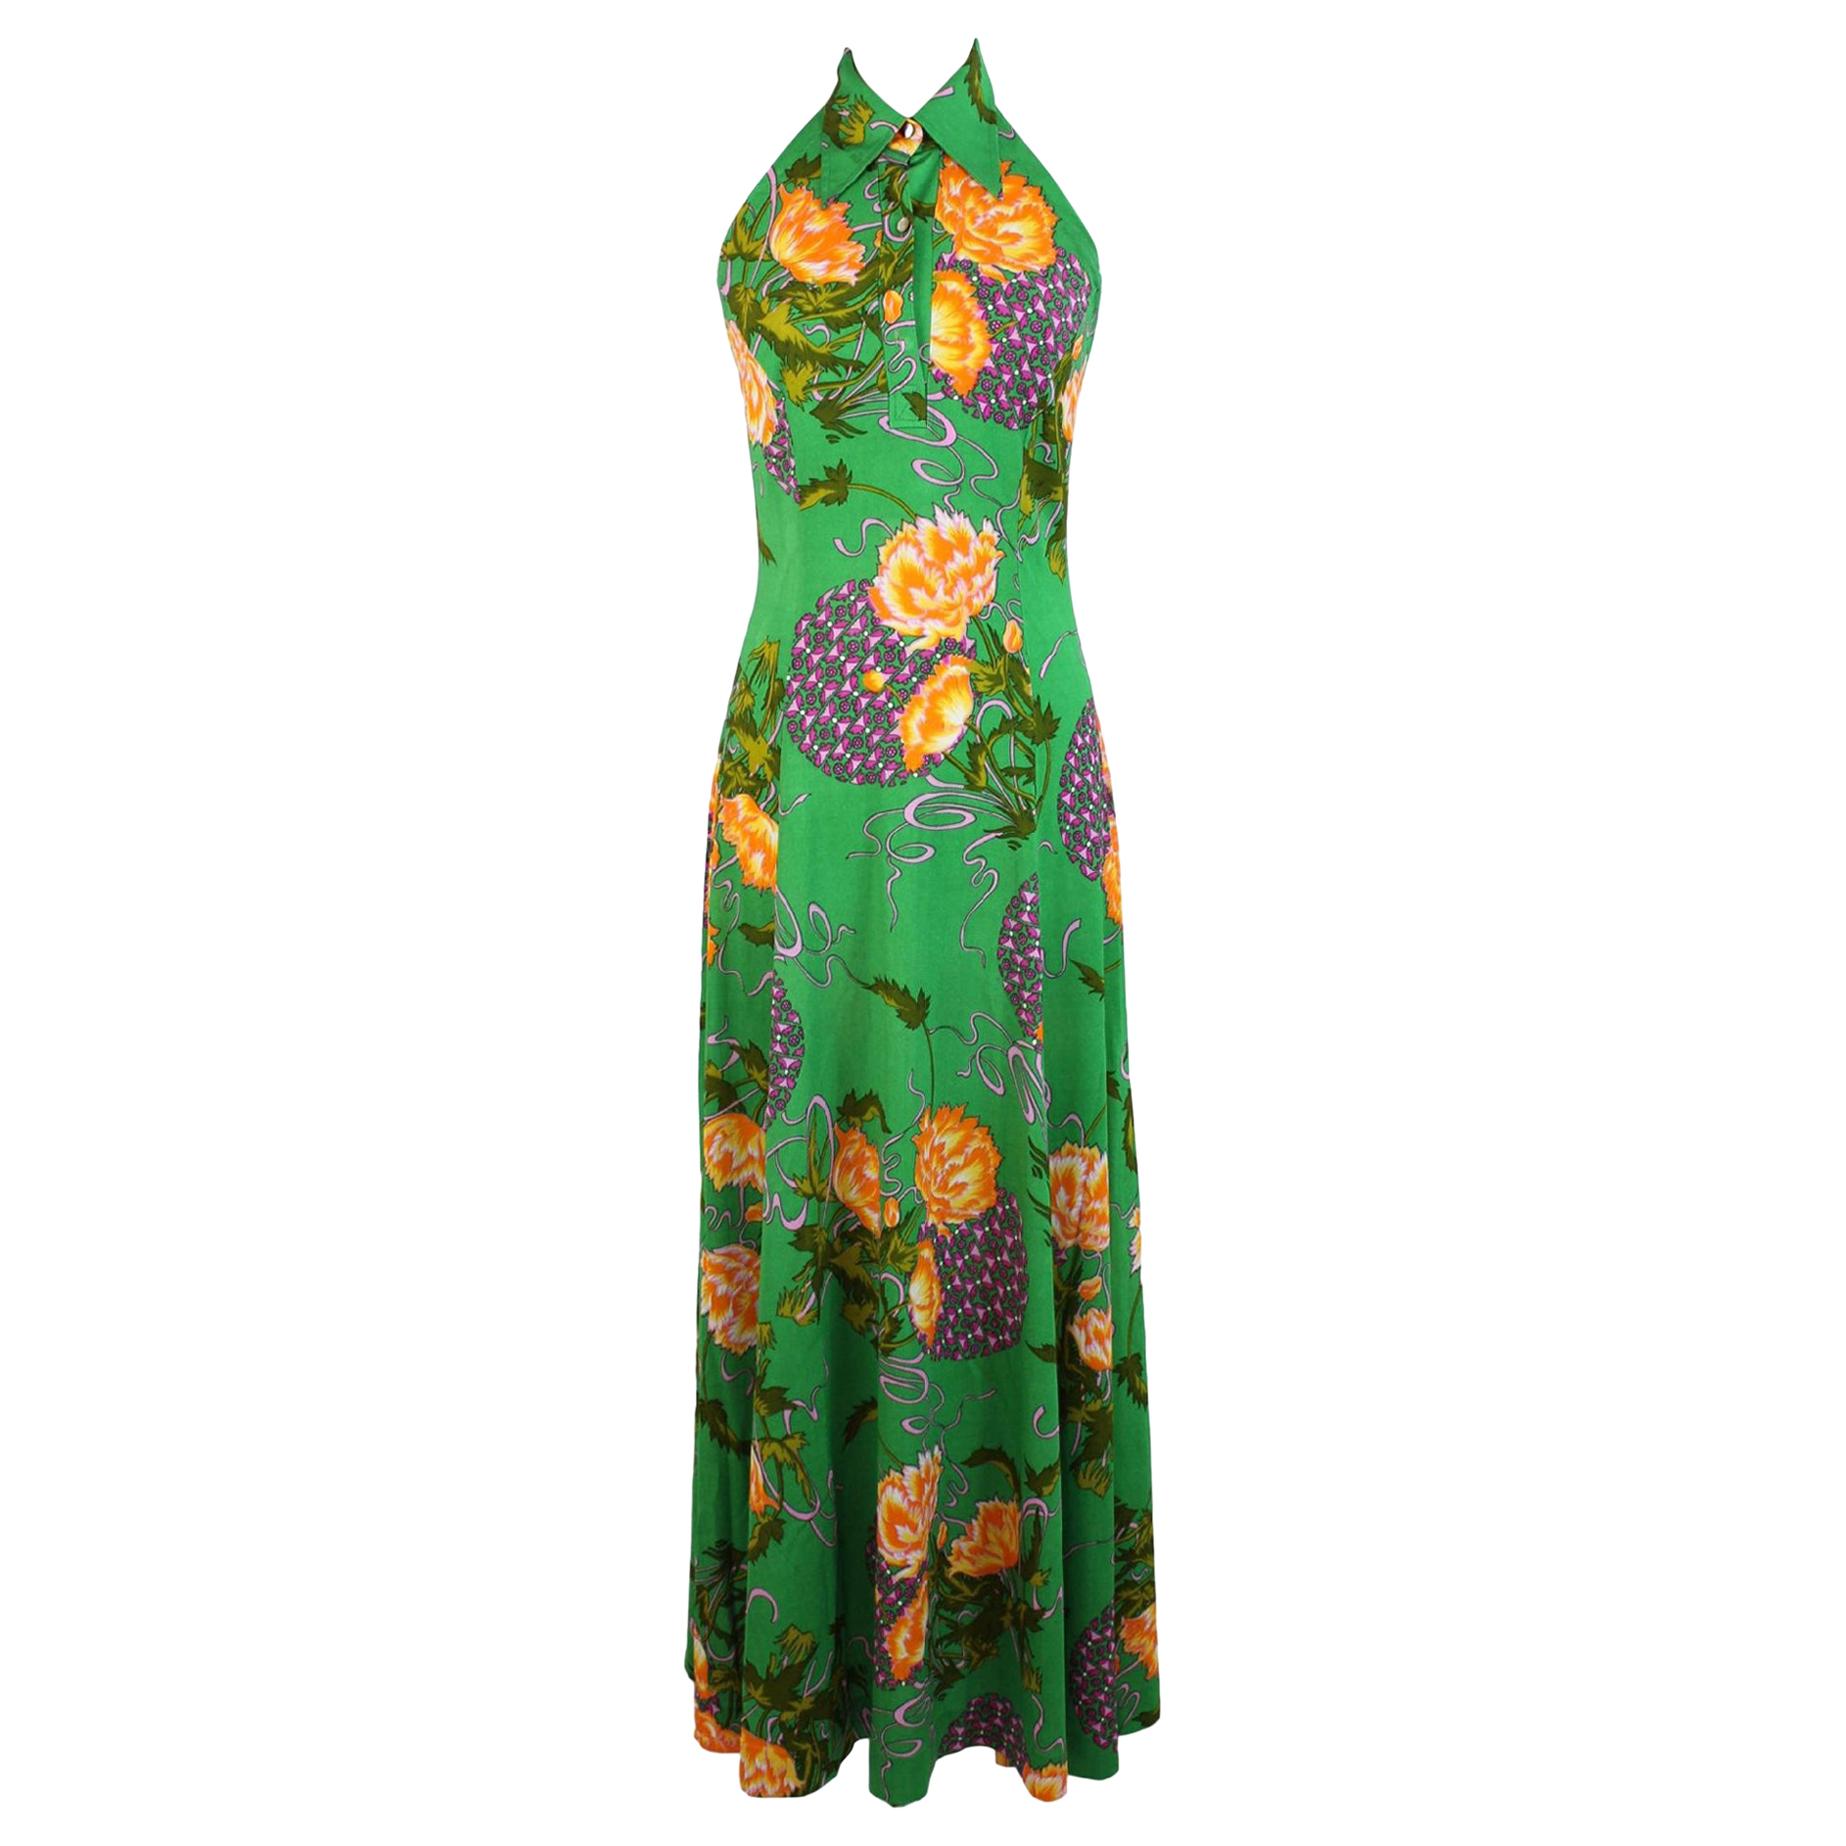 Long dress for women, green with colorful floral patterns. American neckline, sleeveless. Made in Italy. Excellent vintage conditions.

Size: 40 It 6 Us 8 Uk

Shoulders: 40 cm
Chest / bust: 44 cm
Length: 150 cm